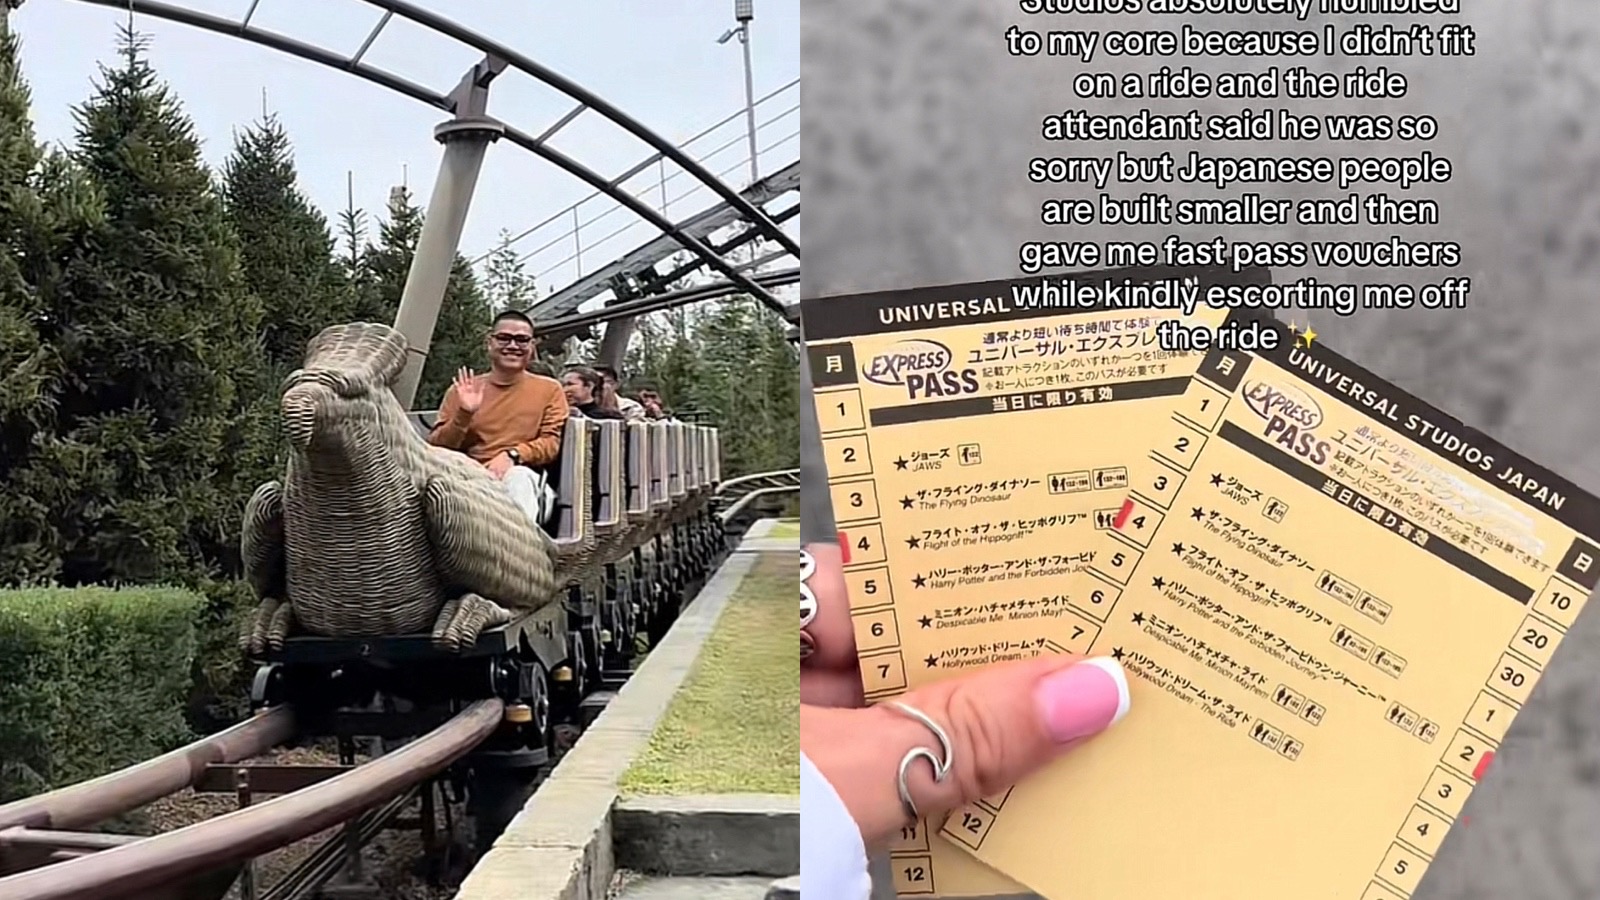 Woman “humbled” after told she’s too big for roller coaster at Universal Studios Japan - Dexerto